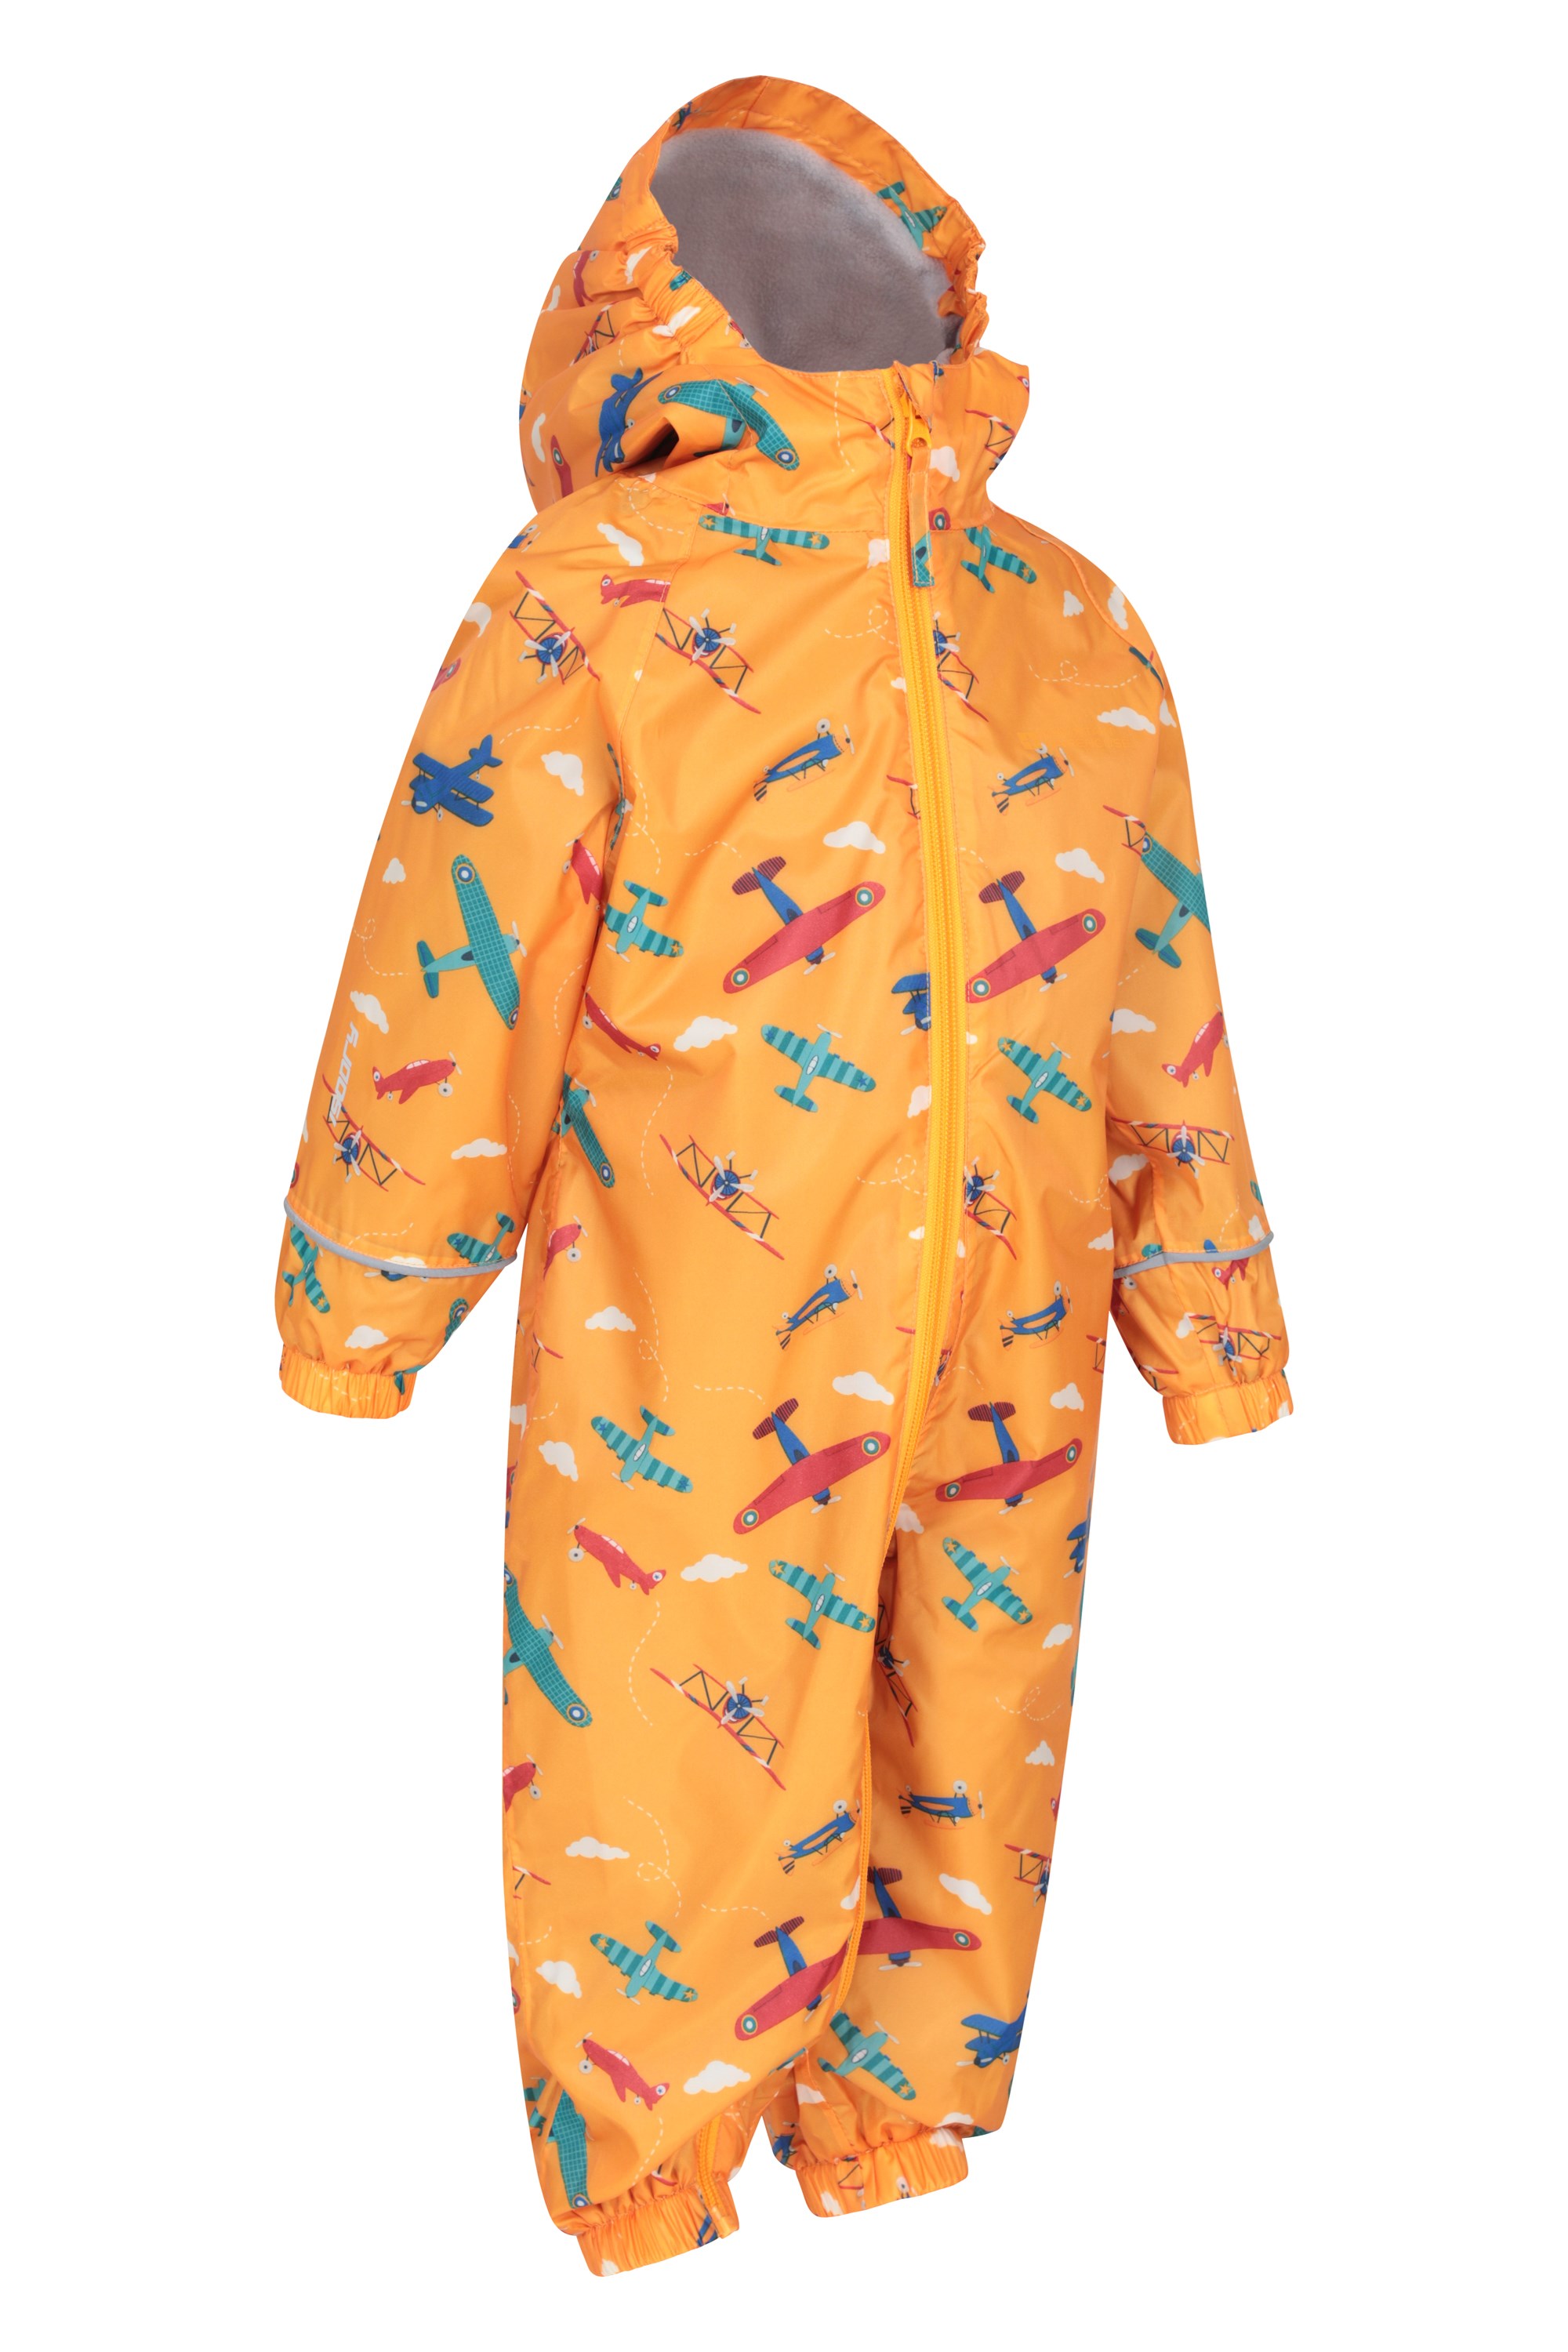 Kids Waterproof Softshell Fleece Lined Puddle All In One Rain Suit Overall